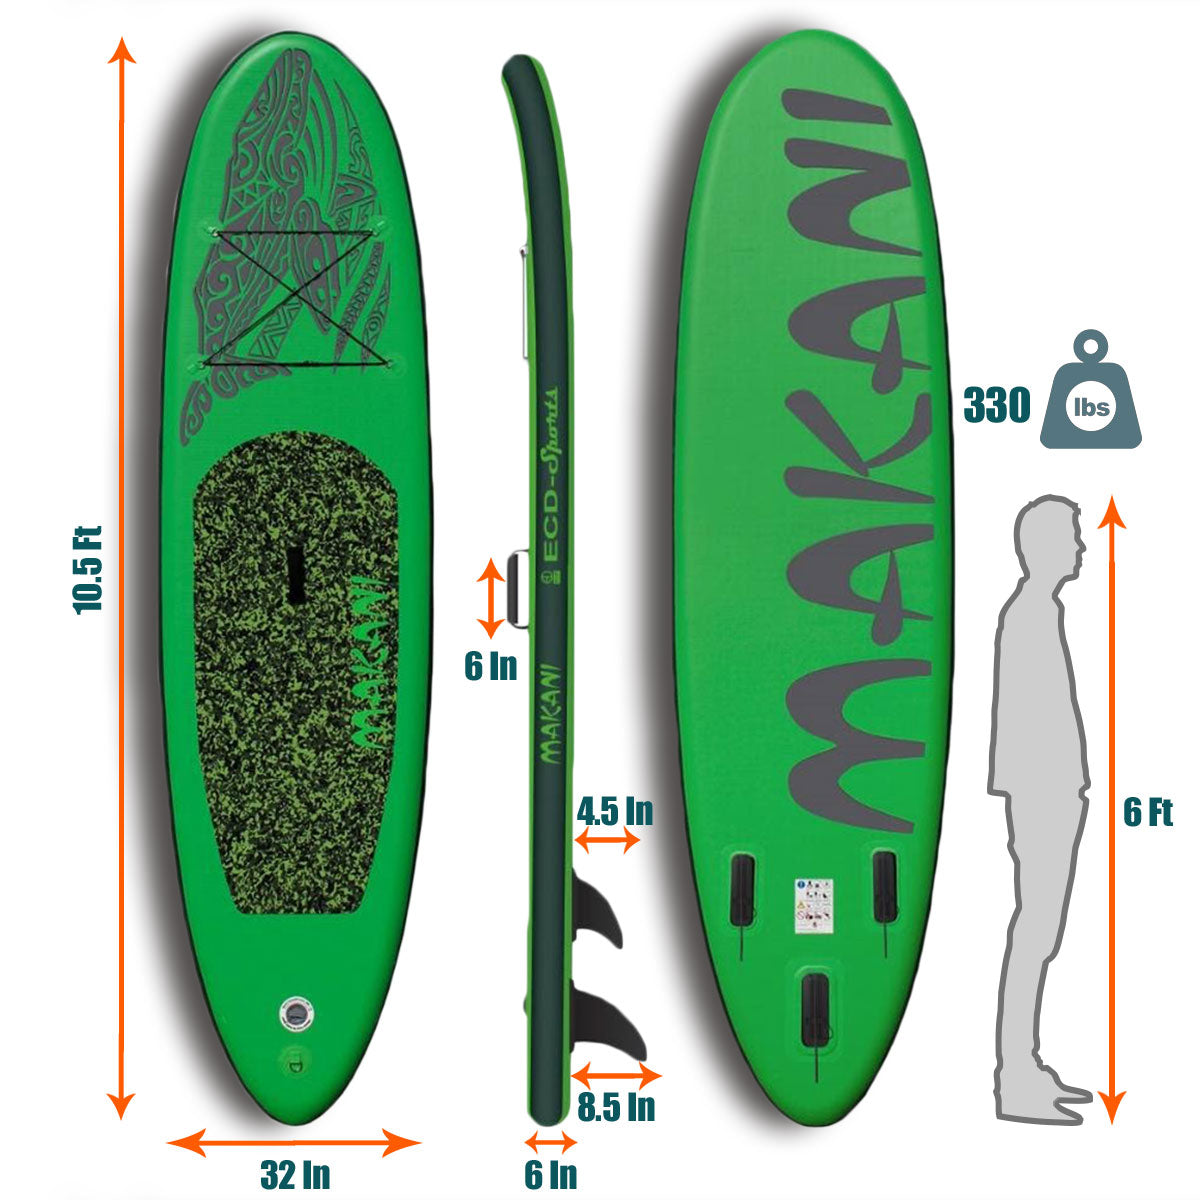 TGO Gear 10.5' iSUP Inflatable Stand Up Paddle Board - All-Around Versatility, Anti-Slip Deck, 3 Fins - Includes Pump, Leash, Backpack, Repair Kit - Green Mako